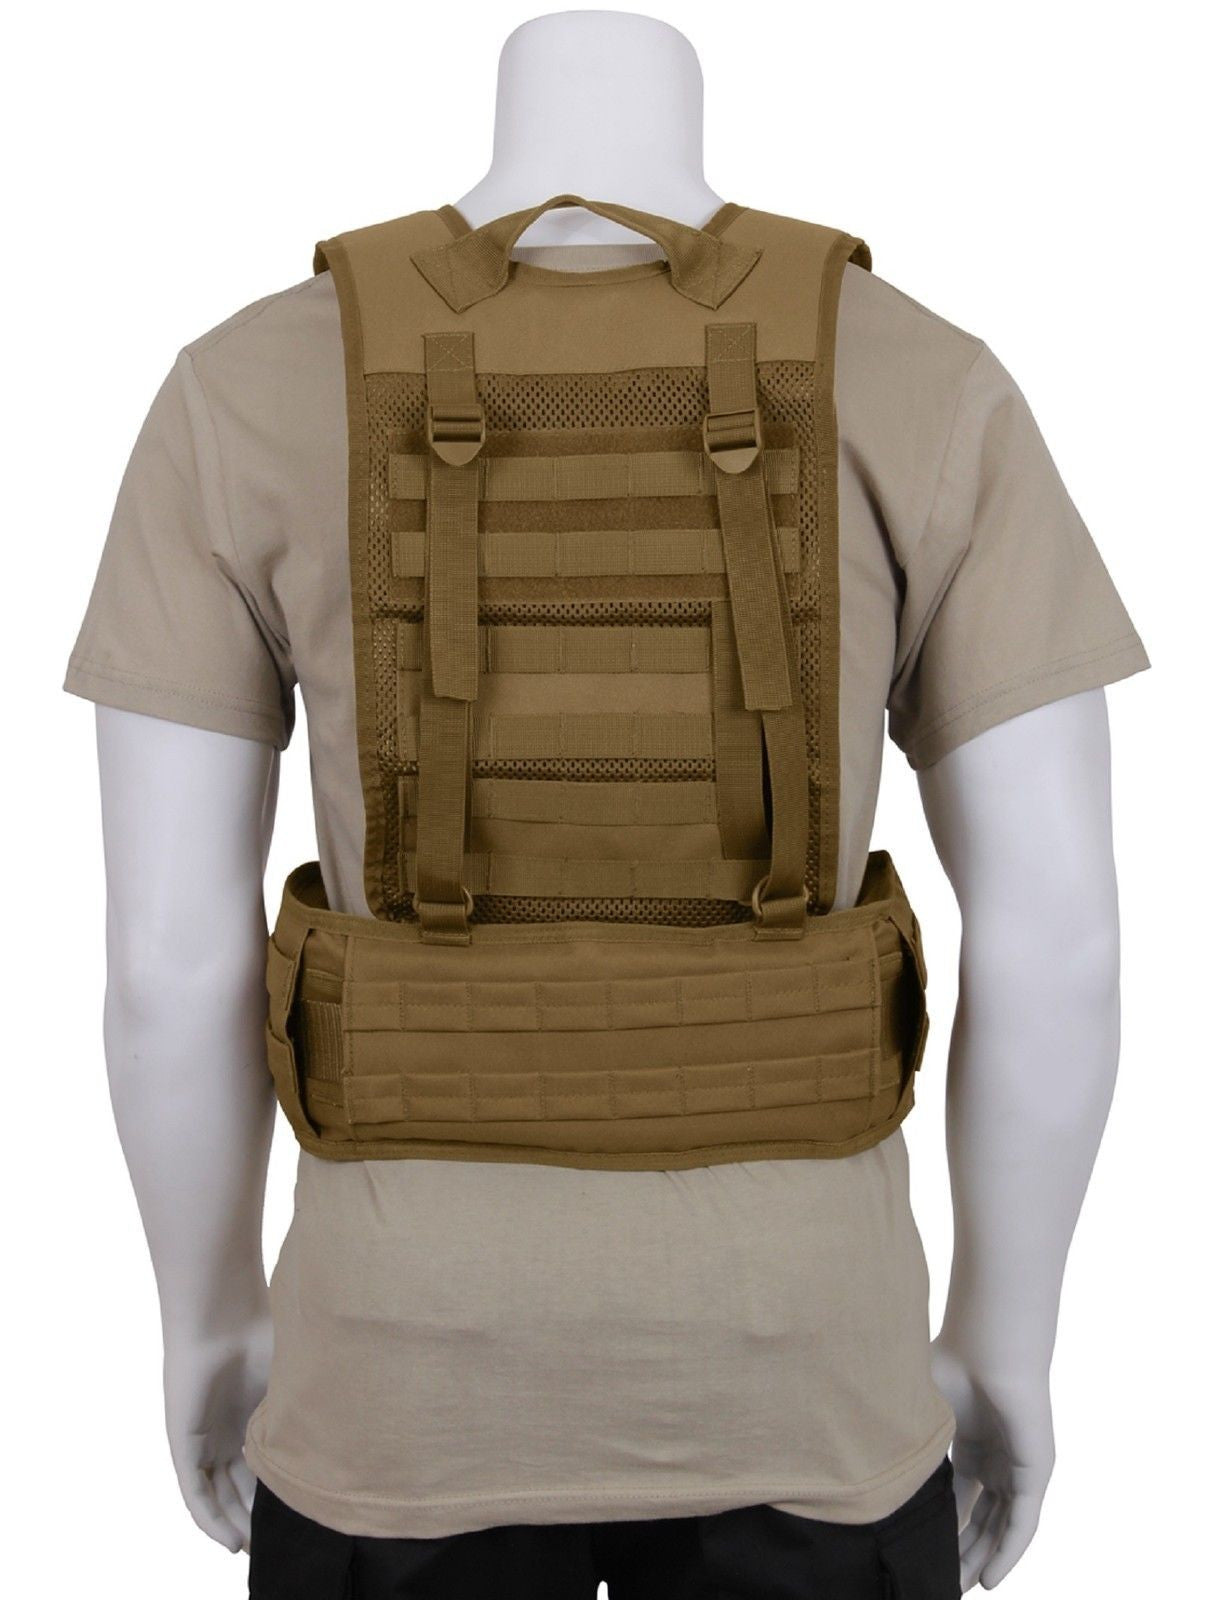 Black or Coyote Brown Tactical Harness - Rothco MOLLE Equipment Rig 1106